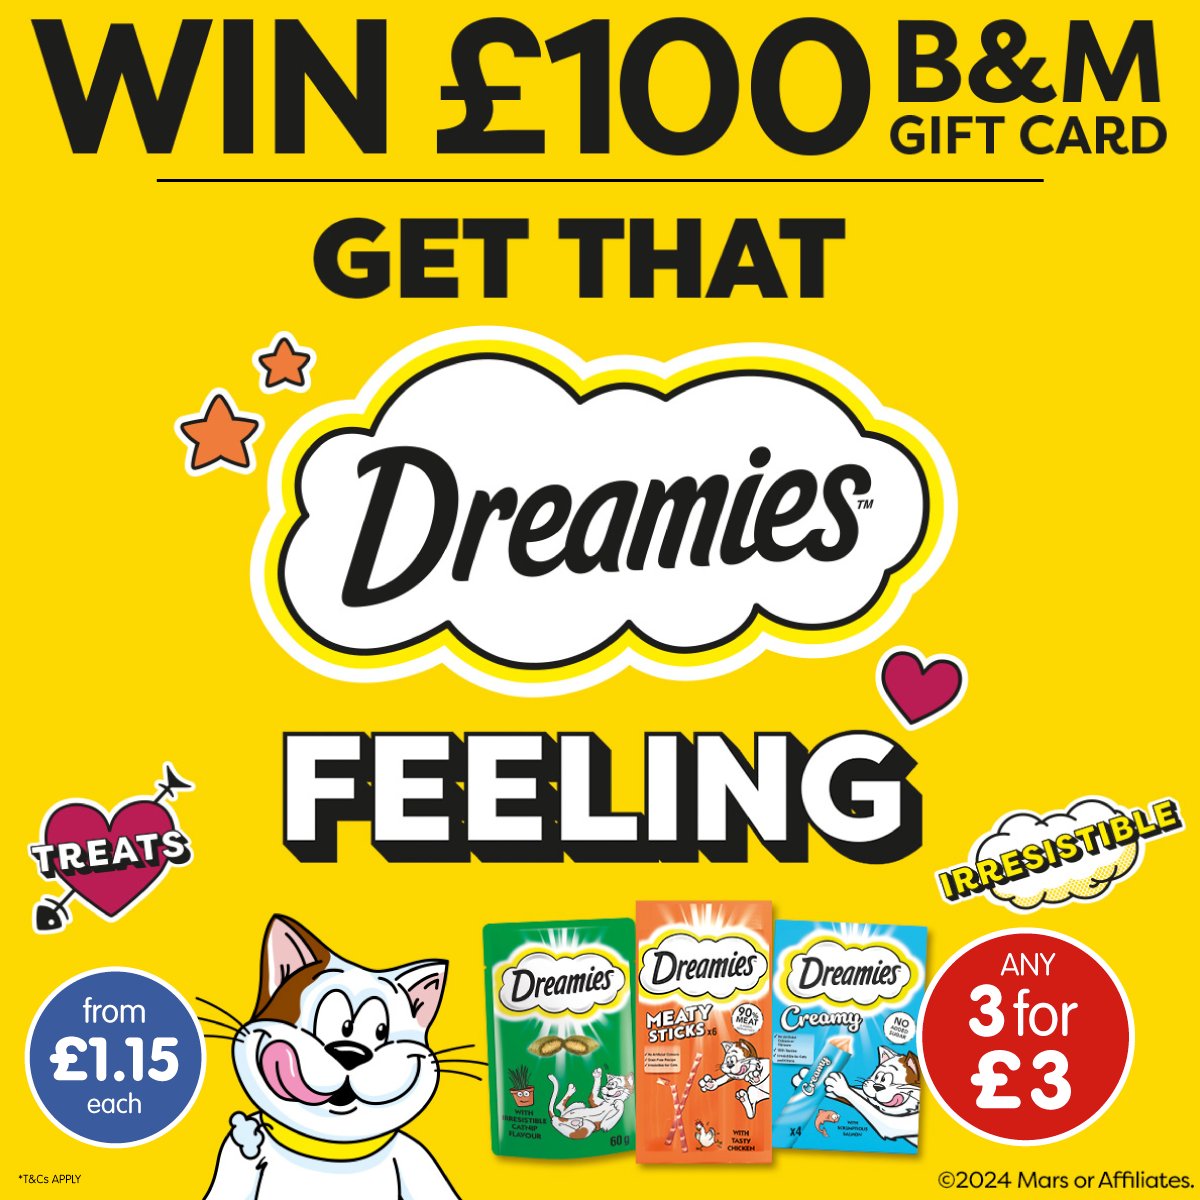 😺 #COMPETITION TIME 😺 Our #PetEvent is in full swing, so to celebrate we've teamed with @dreamiesuk to giveaway a £100 B&M gift card to one lucky winner! For a chance to #WIN, simply; 1) FOLLOW US 2) RT 3) COMMENT #BMDreamies Competition ends 9am 13/3/24